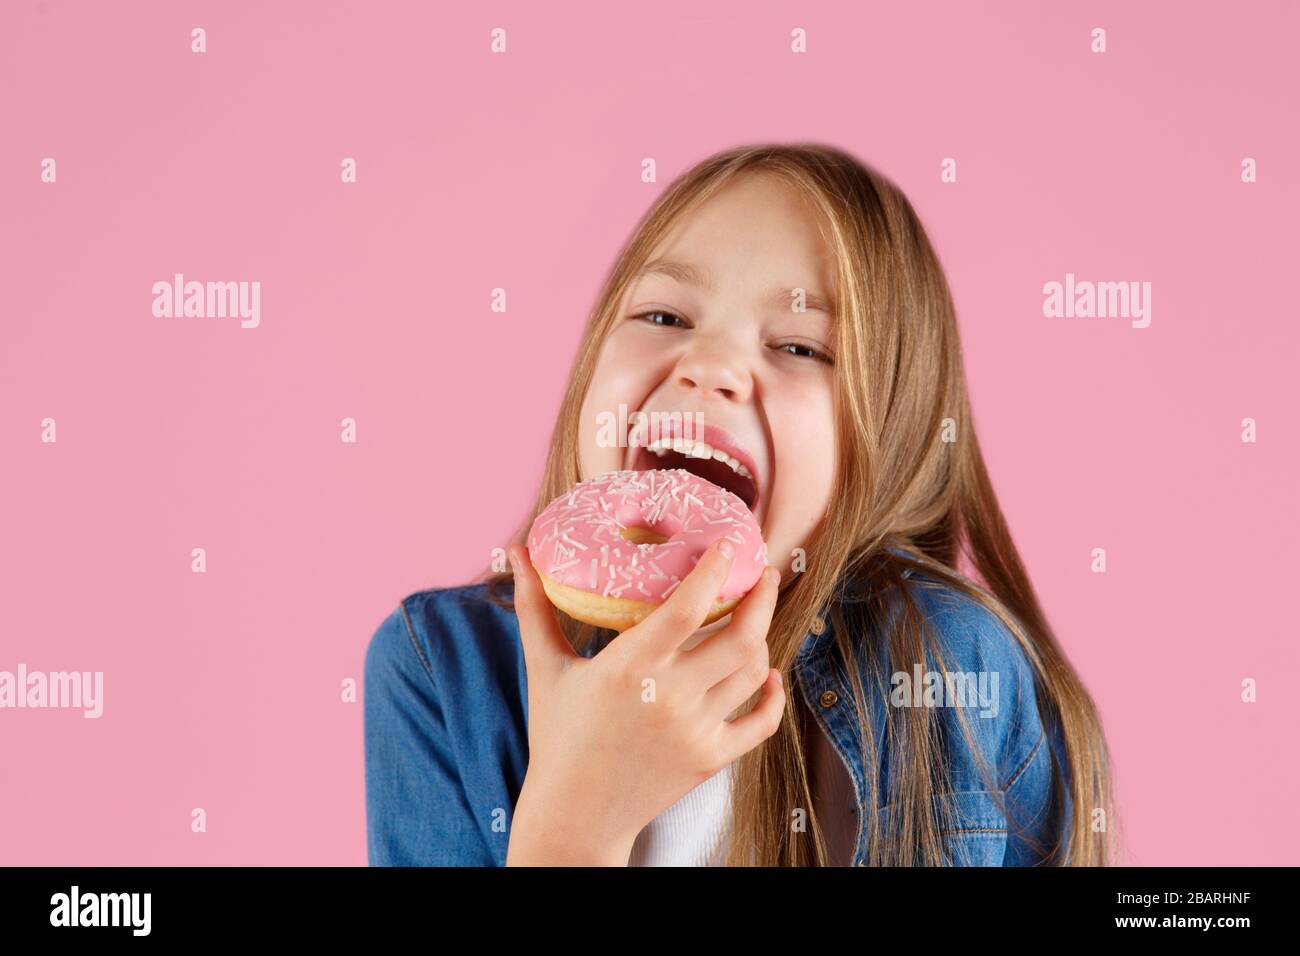 girl playing with a donut on a pink background Stock Photo